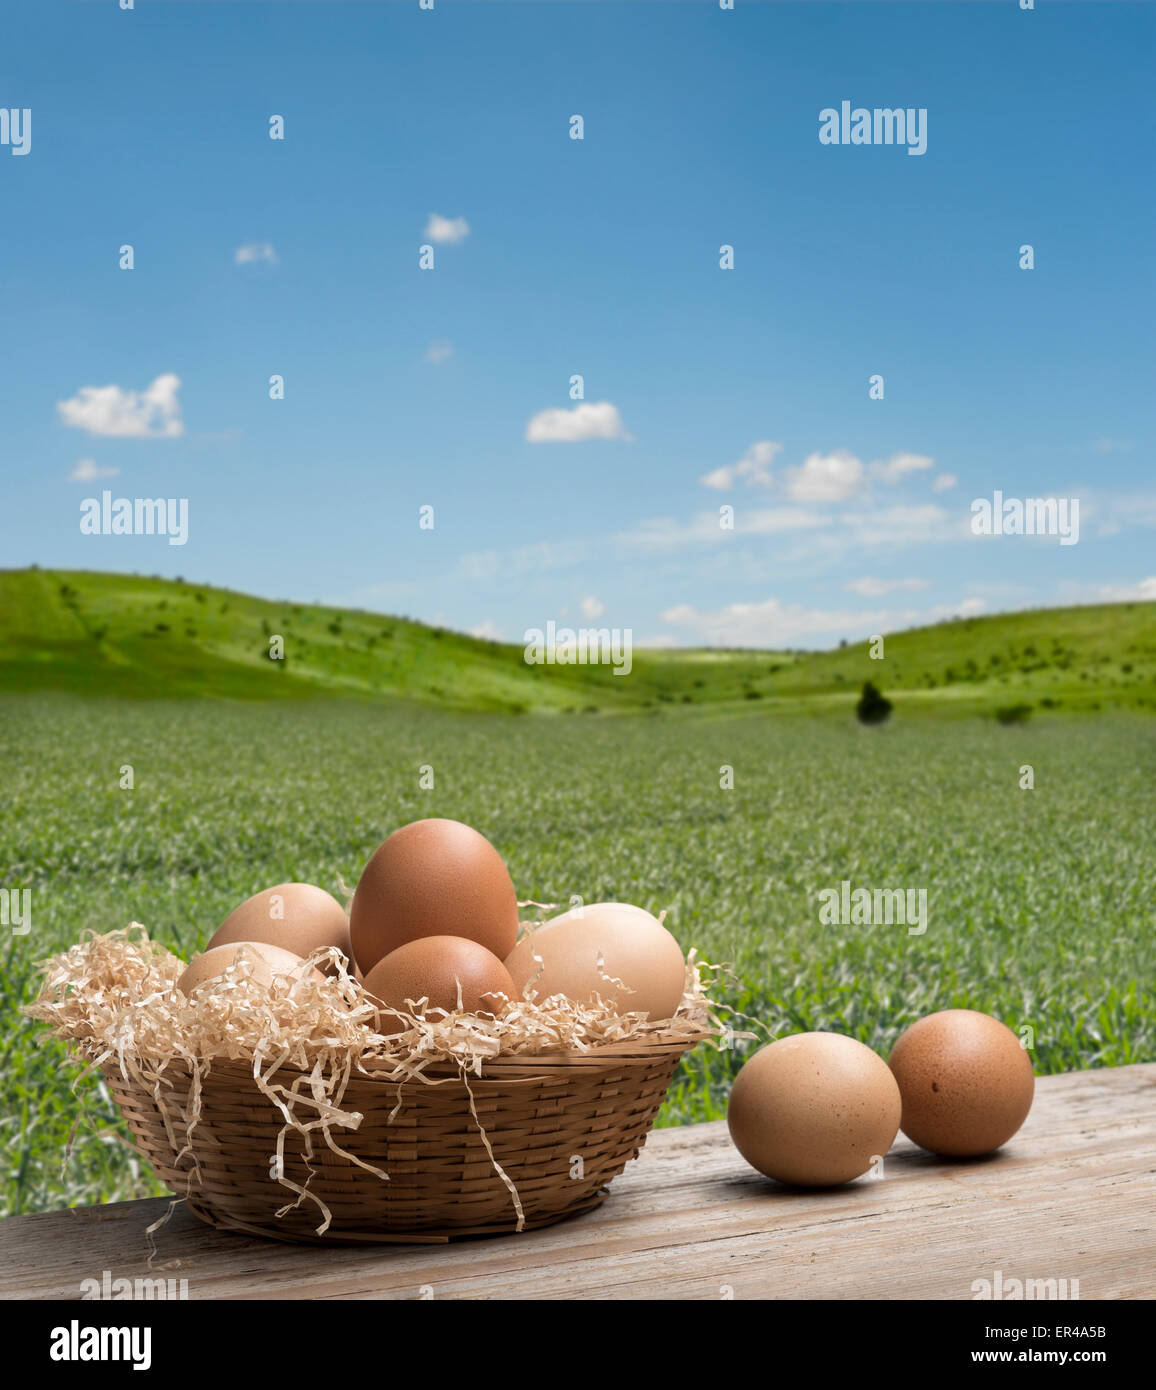 group of eggs in straw basket on wooden table with summer landscape Stock Photo